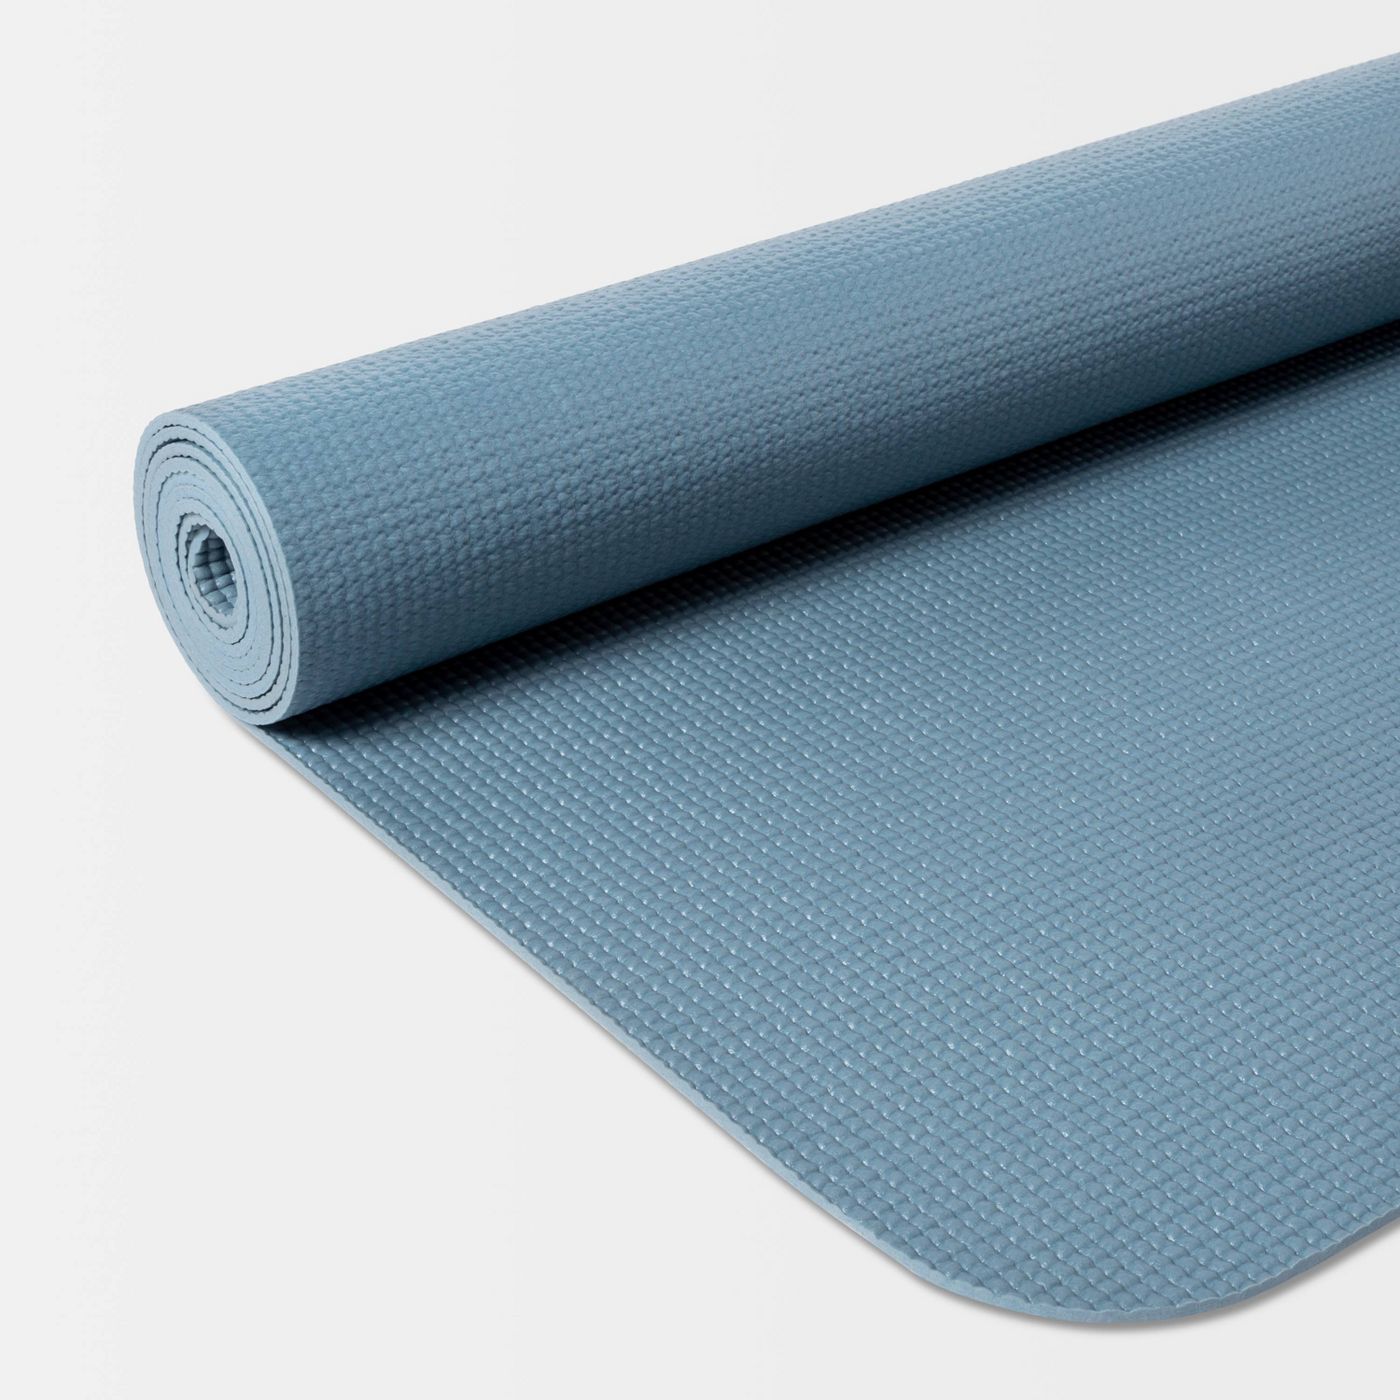 Image of Pure Barre yoga mats that were purchased and bought at Target